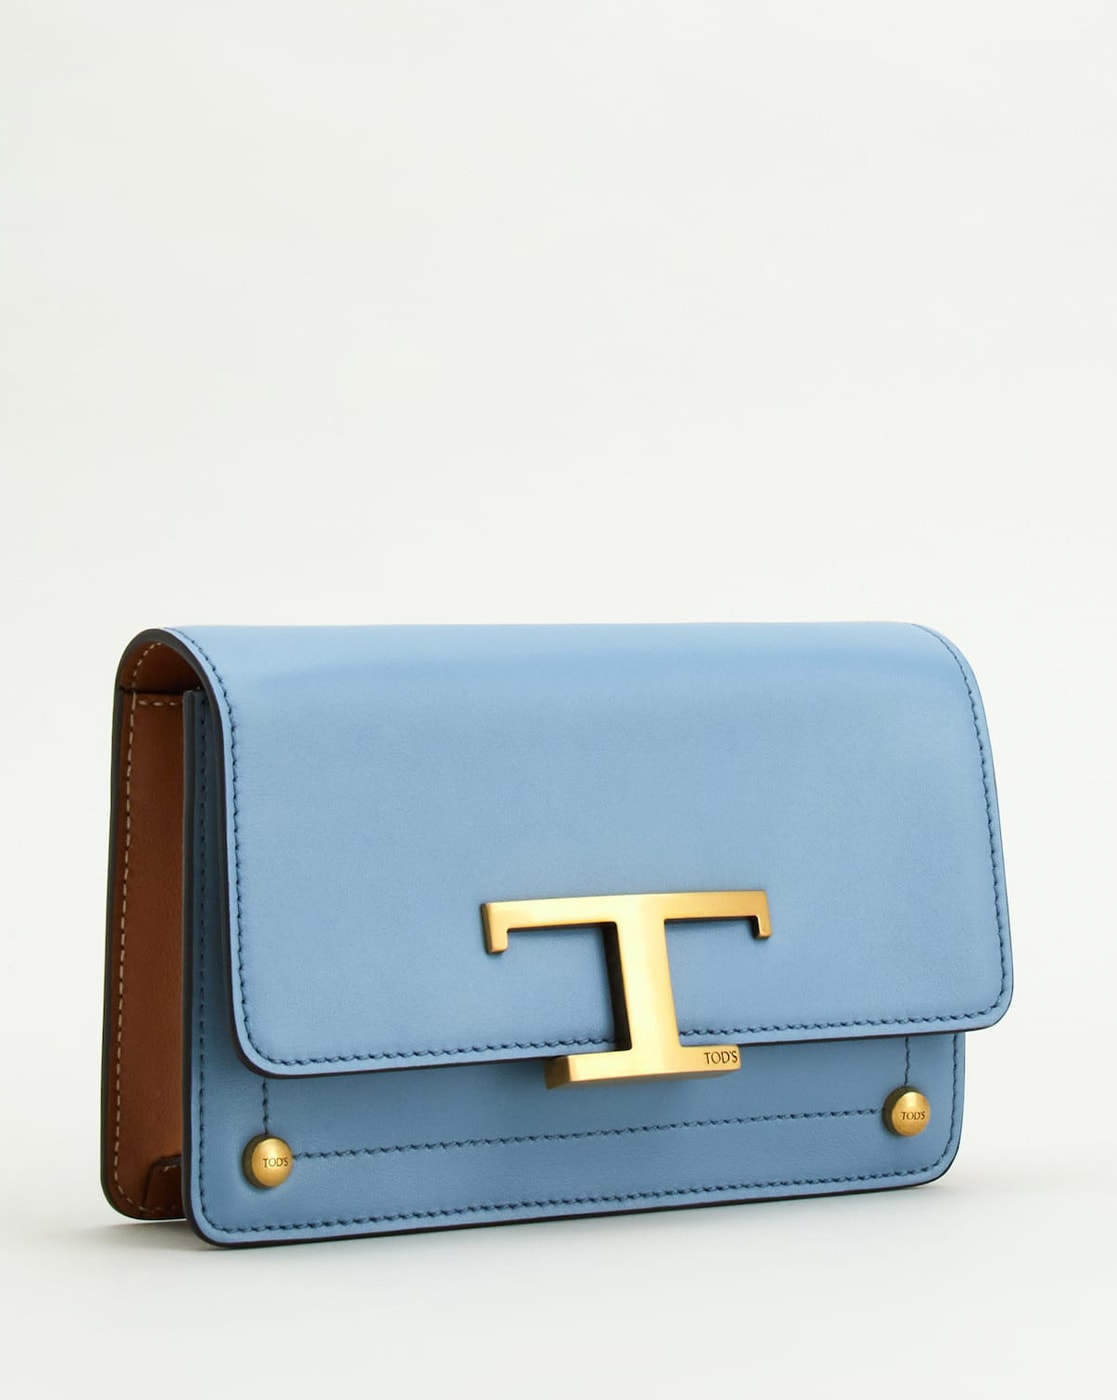 Tod's D-Styling Bauletto Bag in Dove Grey - Kate Middleton Bags - Kate's  Closet